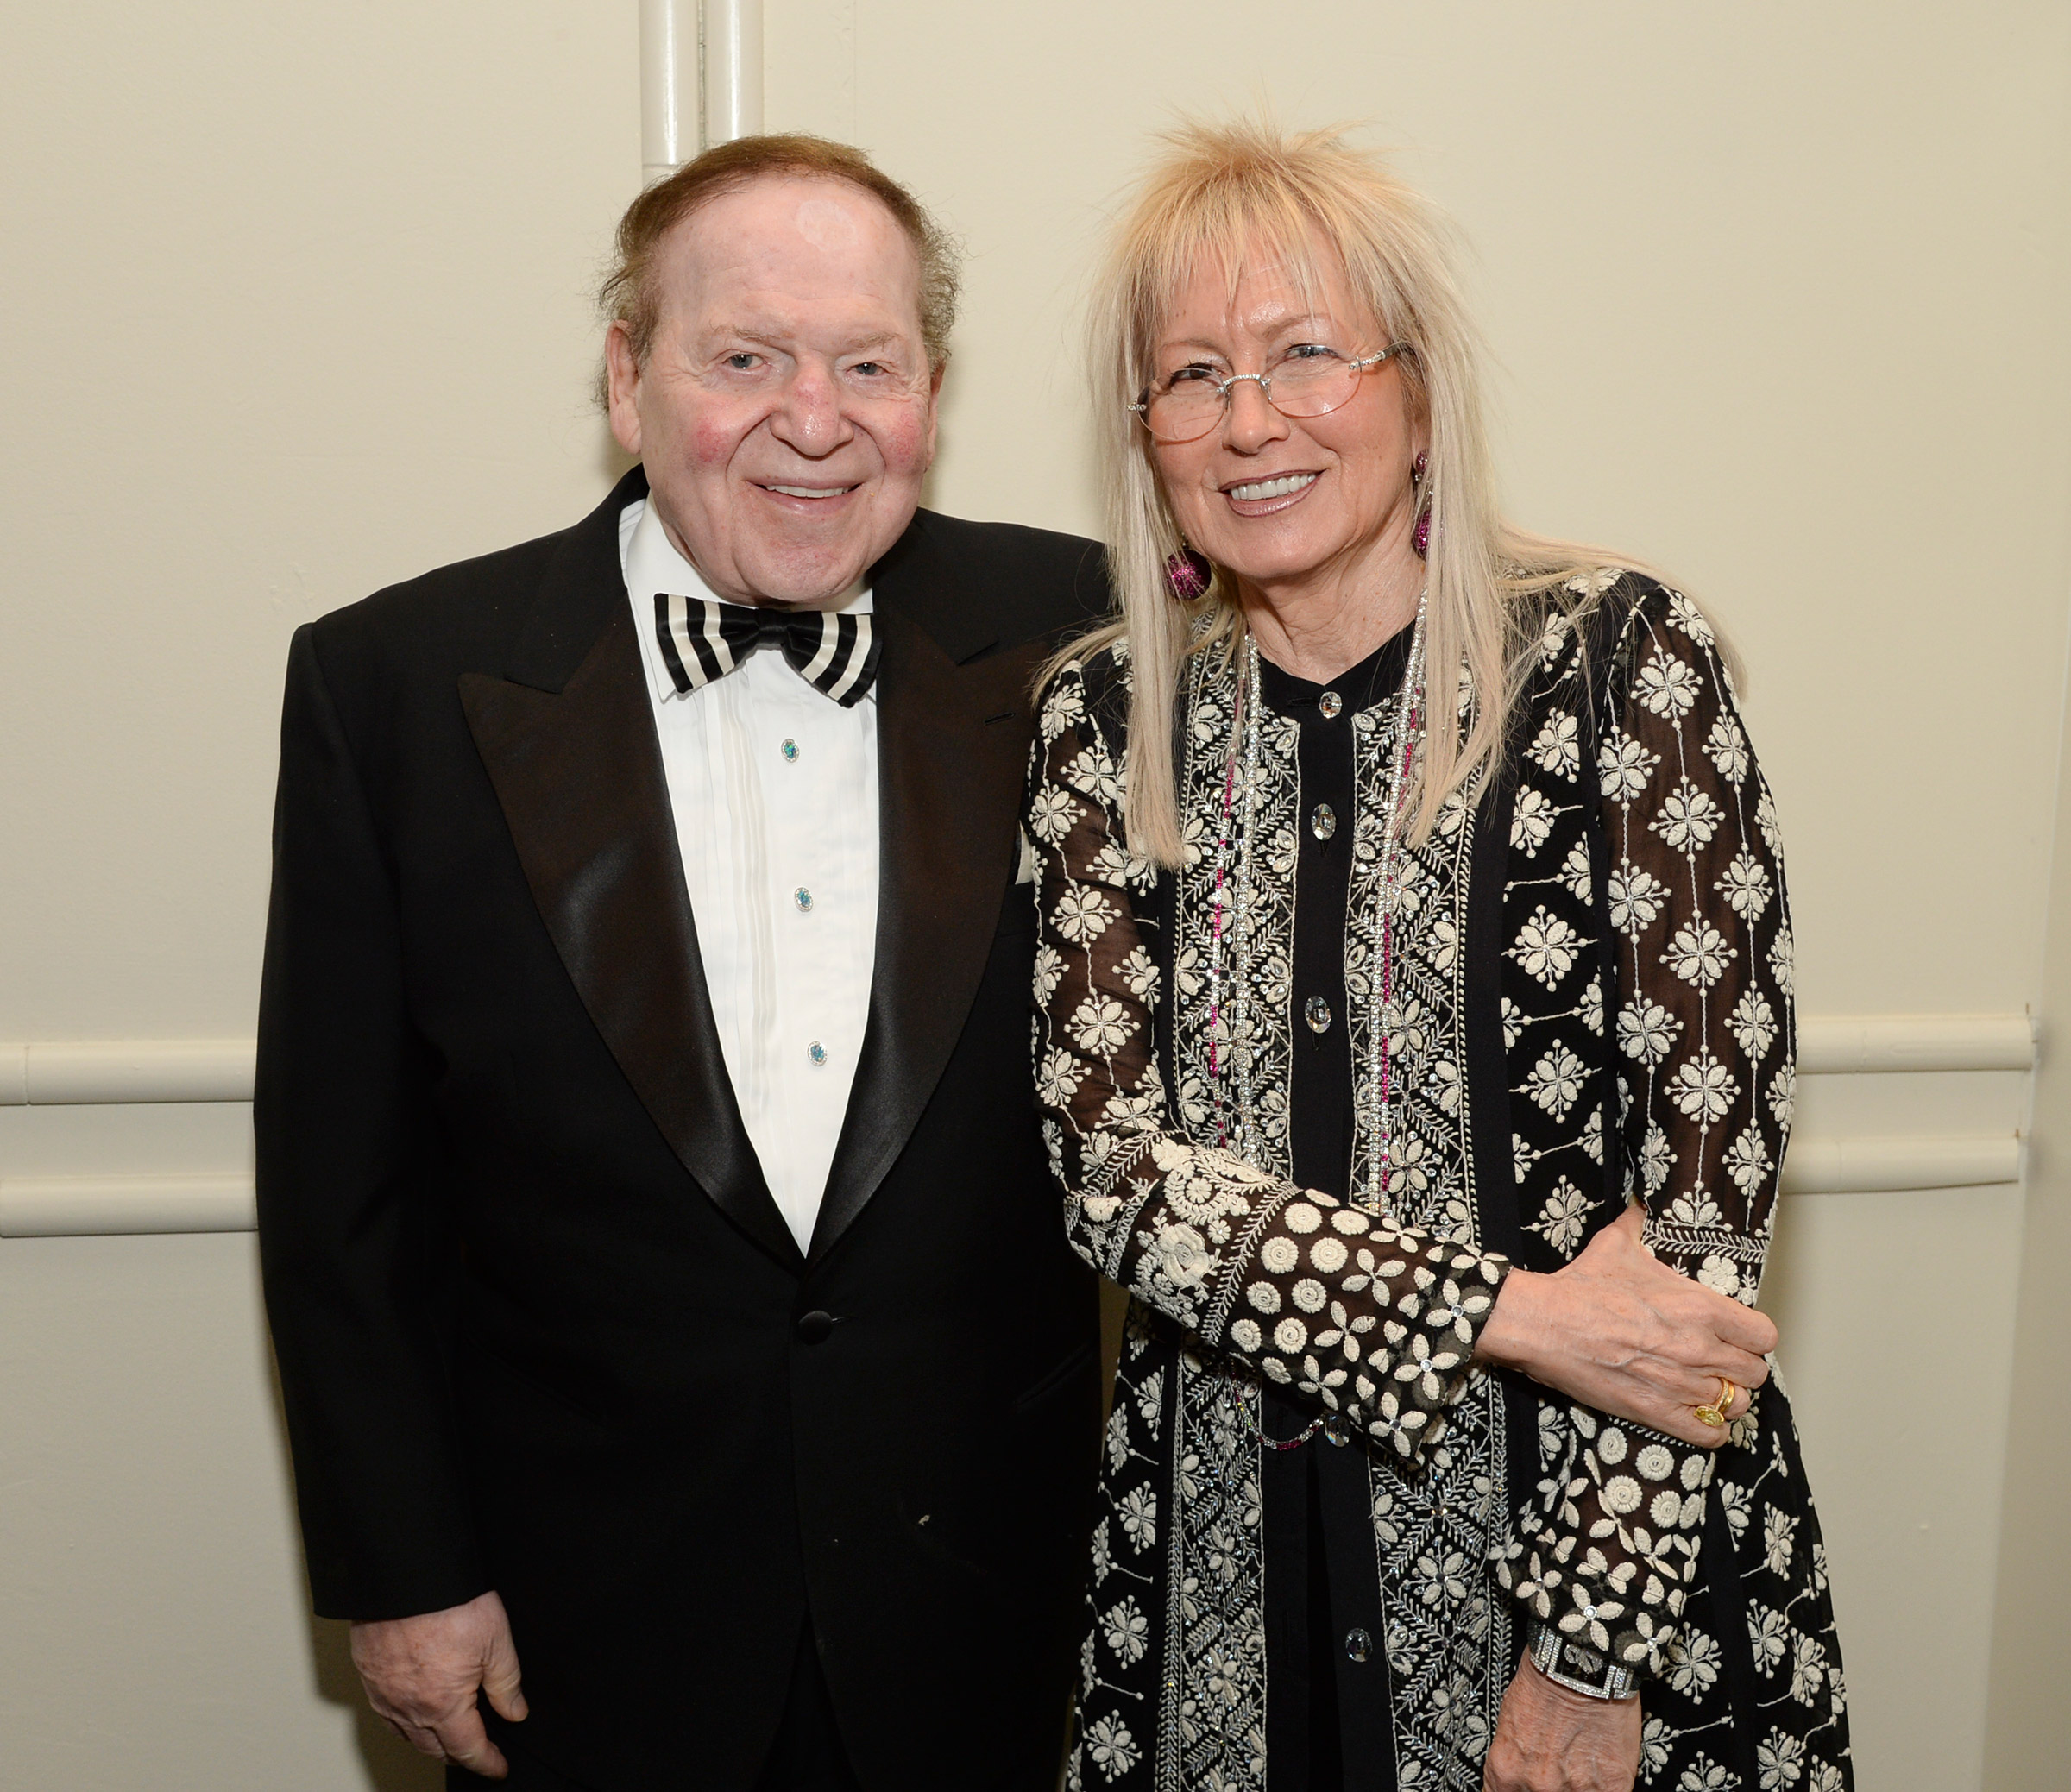 Sheldon Adelson and Dr. Miriam Adelson attend the John Wayne Cancer Institute Auxiliary's 29th Annual Odyssey Ball on April 5, 2014, in Beverly Hills. (Michael Kovac—WireImage/Getty Images)